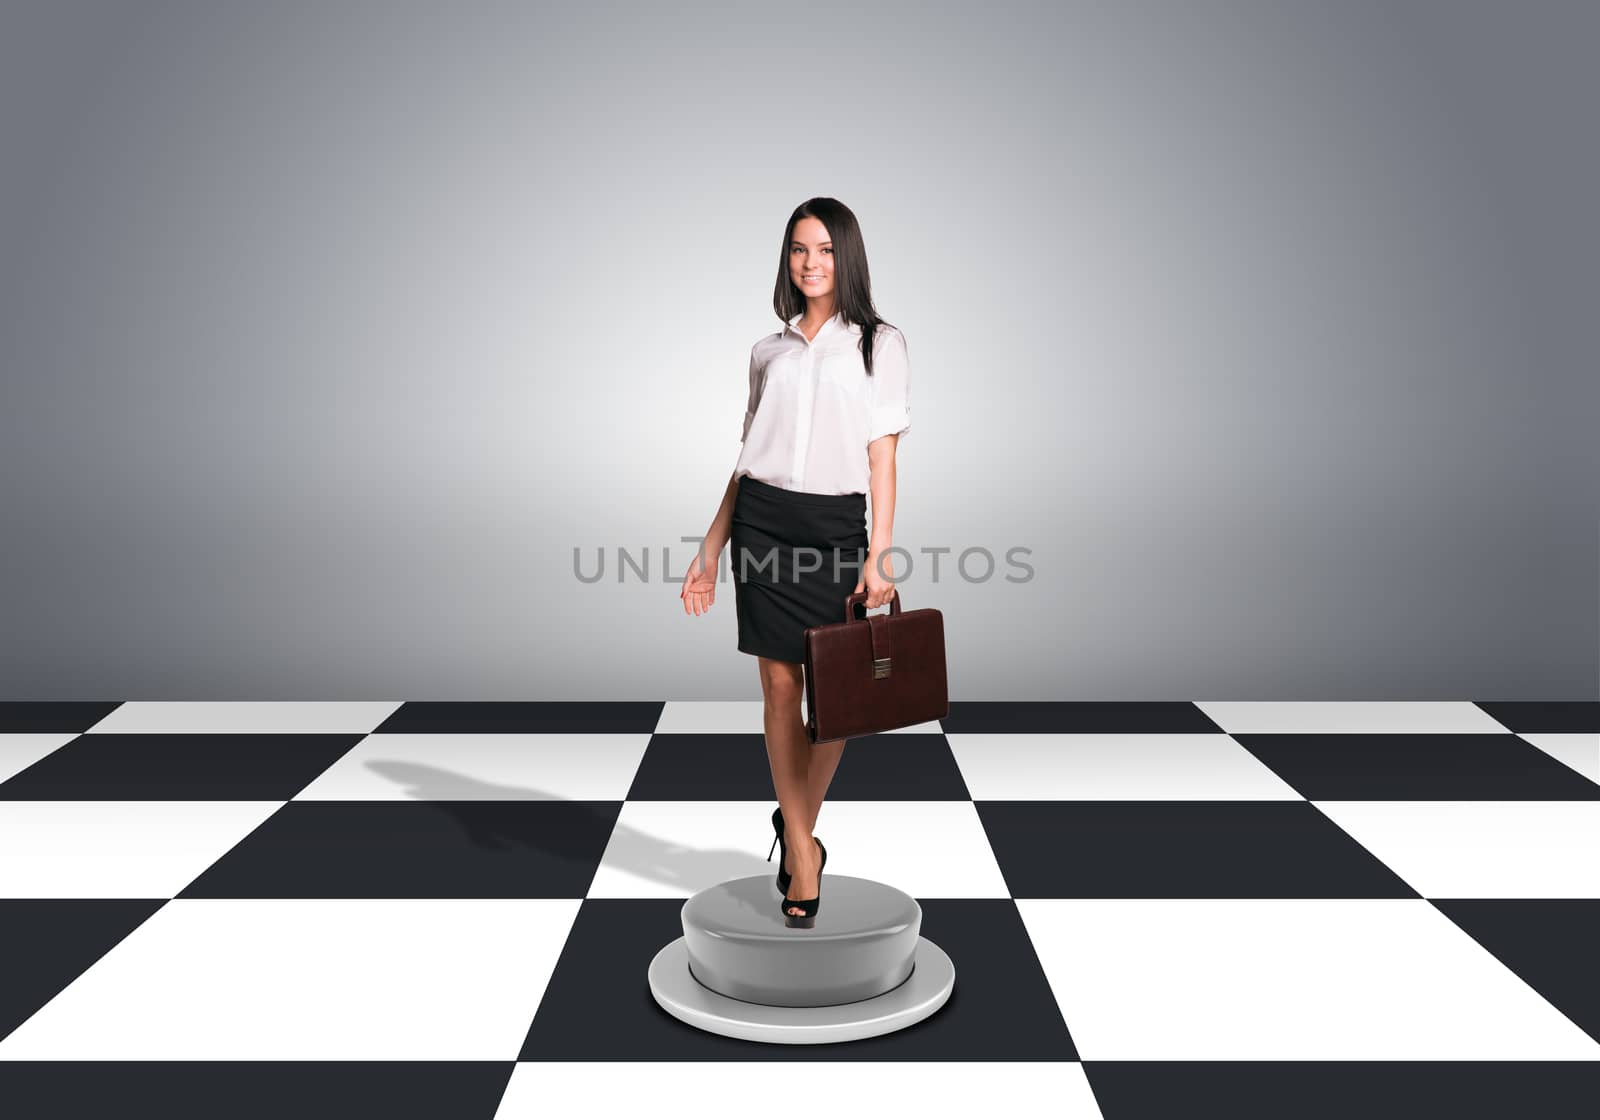 Beautiful businesswoman walking and holding briefcase. Floor with checkerboard texture and gray wall